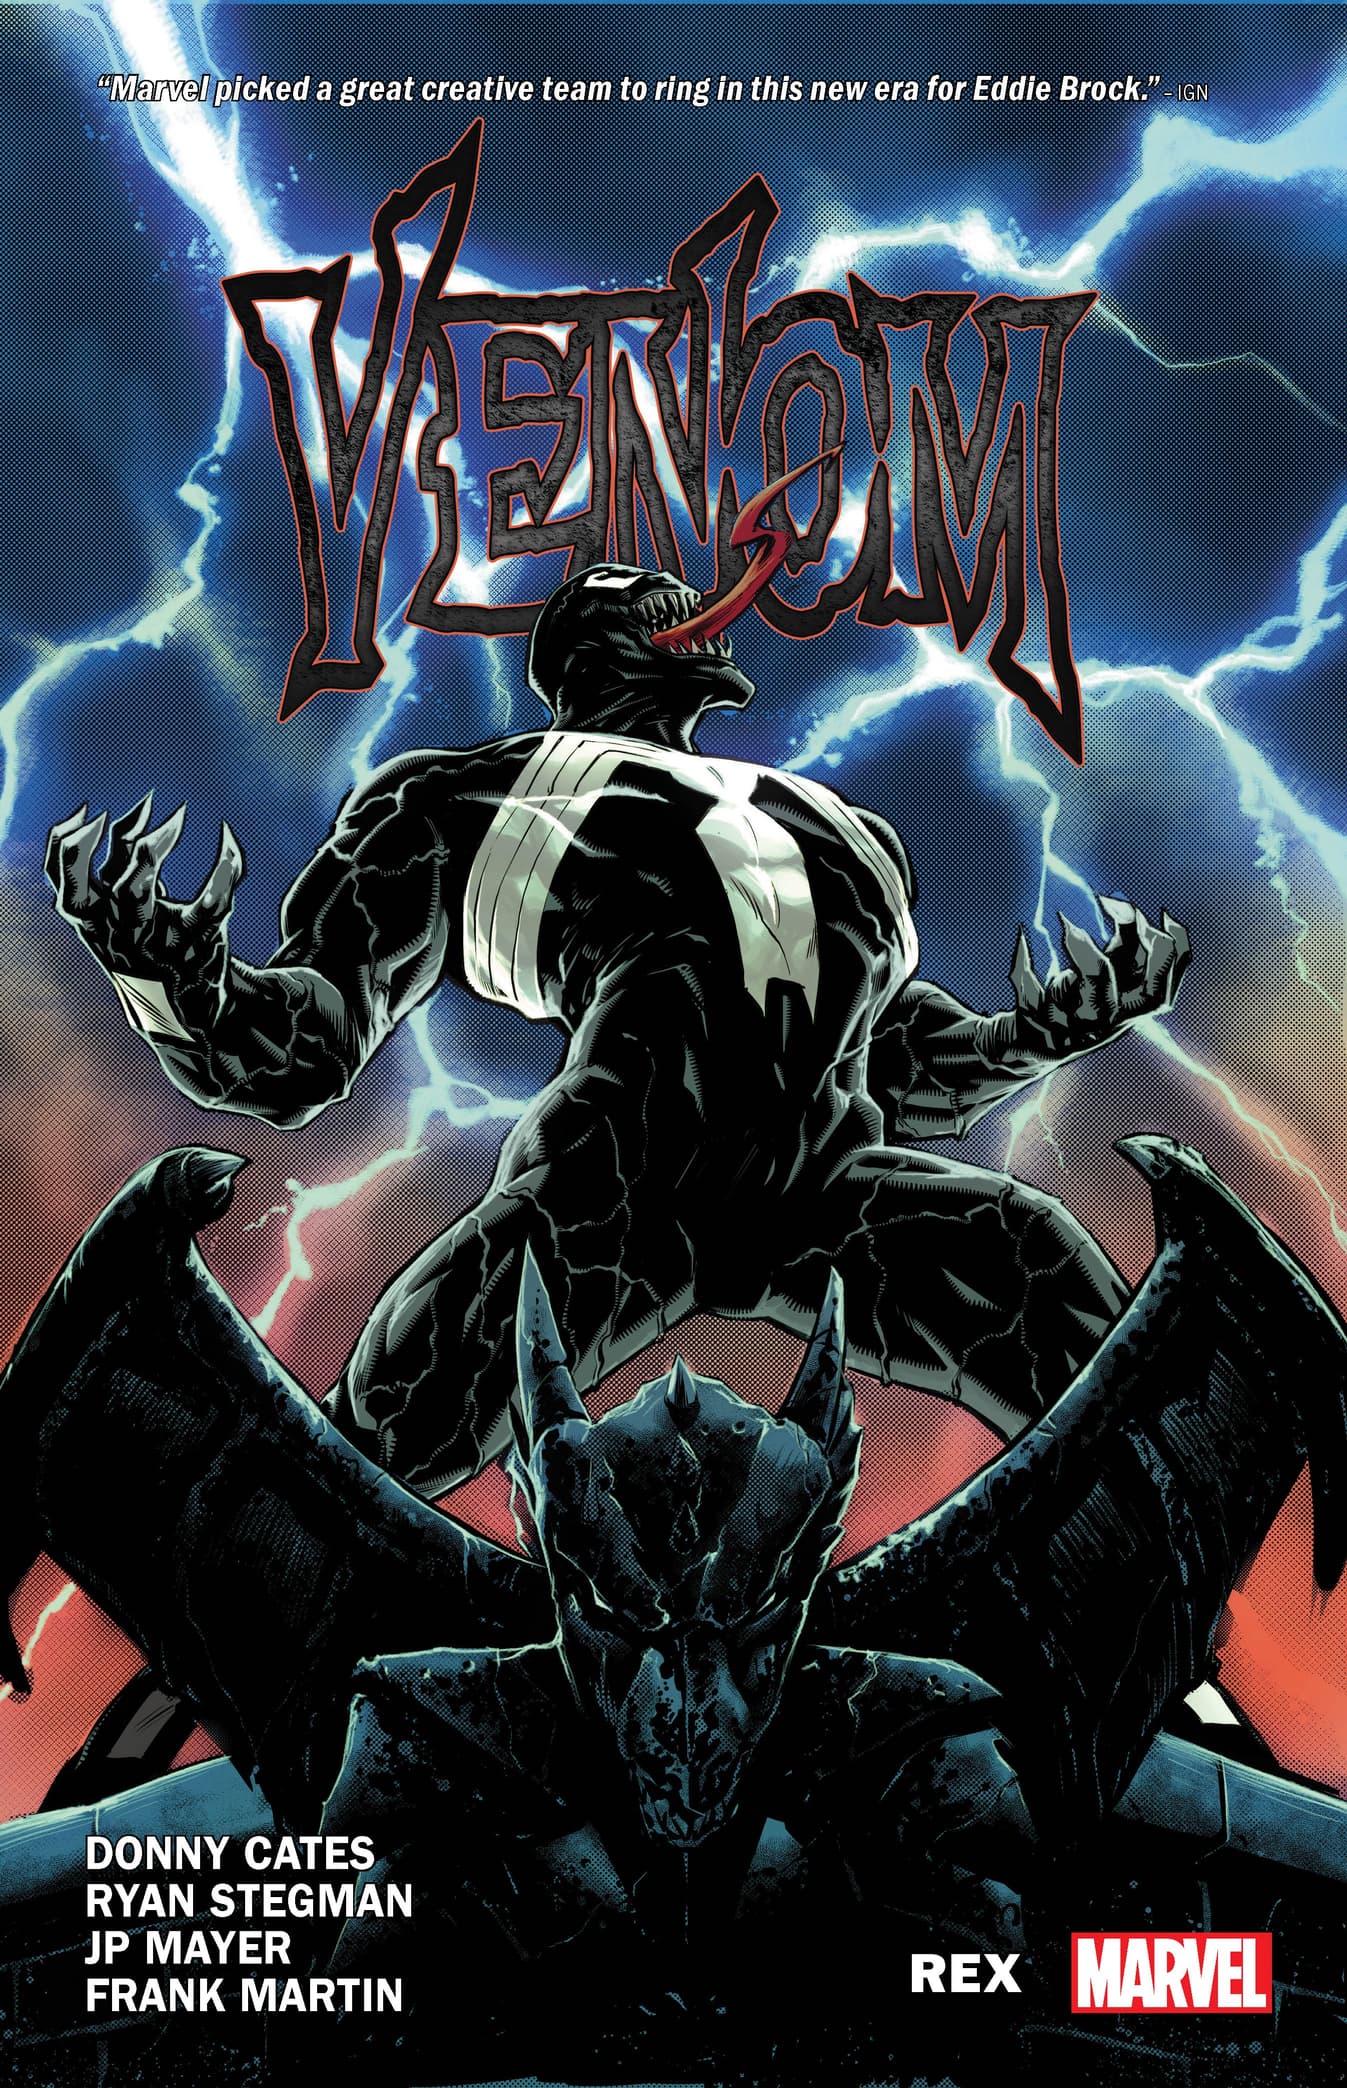 Cover to VENOM BY DONNY CATES VOL. 1: REX.